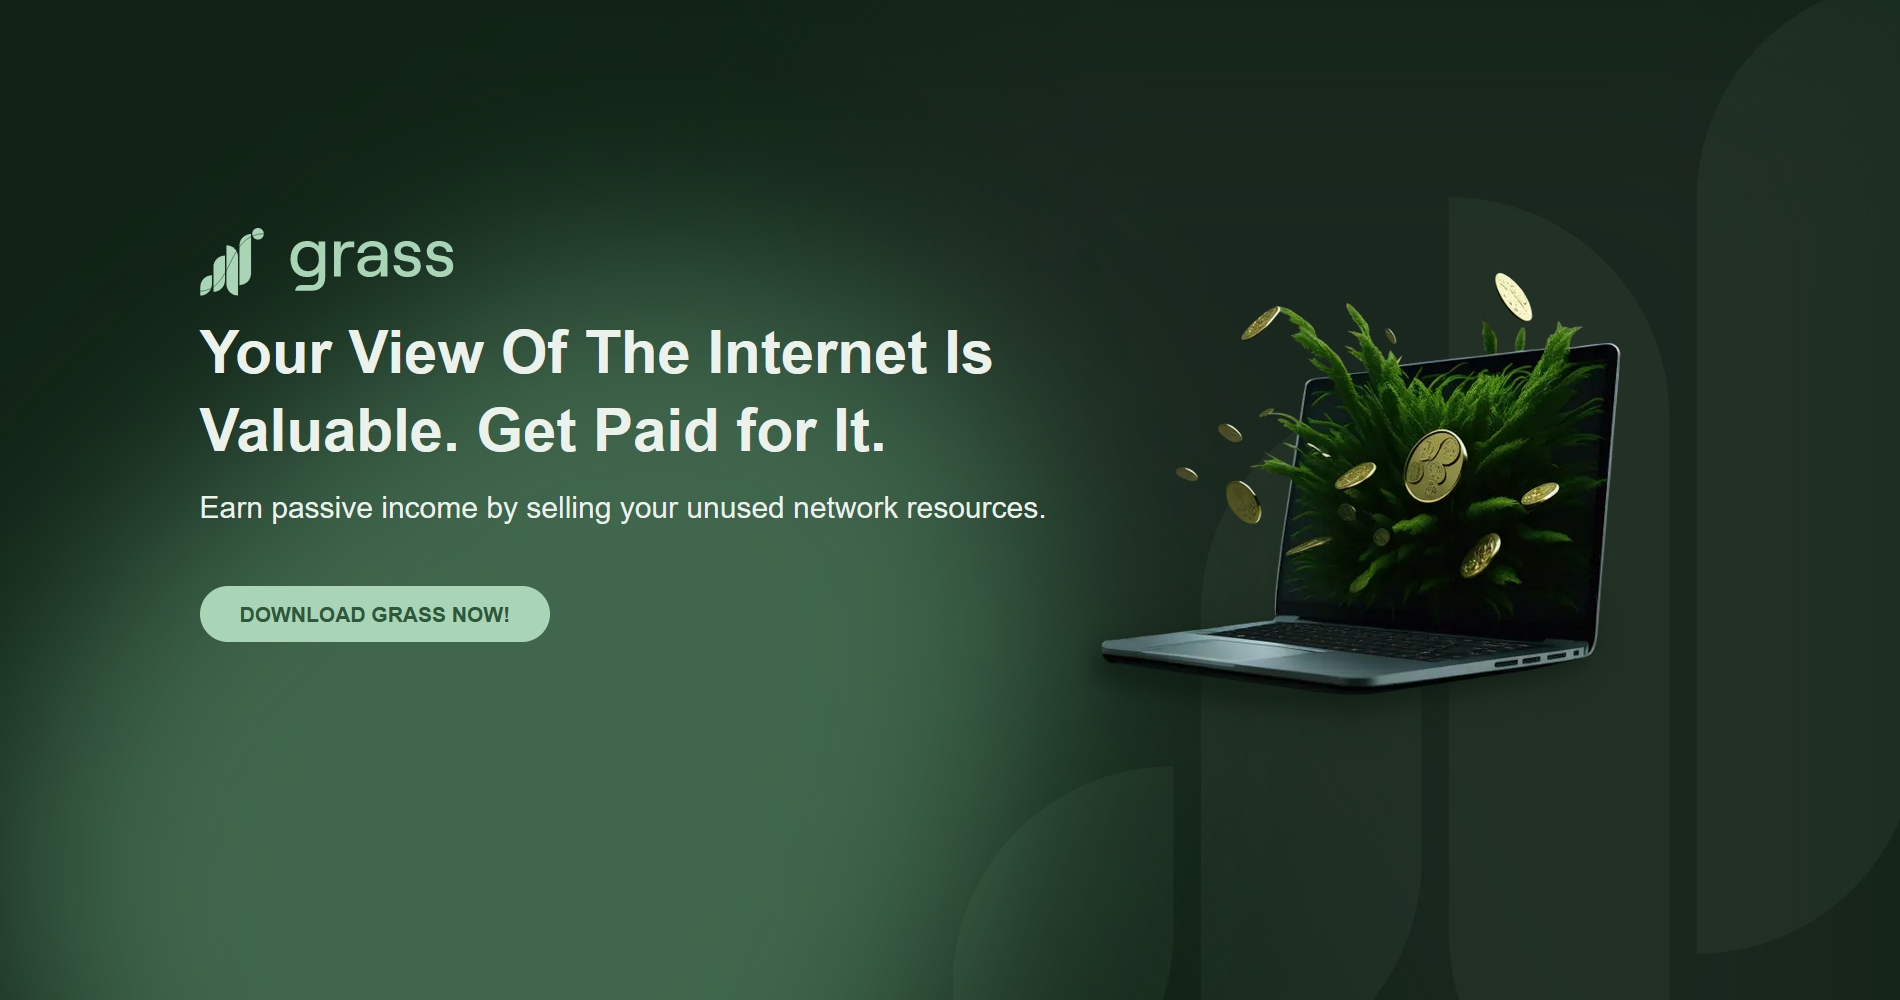 Earn passive income by selling your unused network resources. Earn passive income for sharing your internet connection.